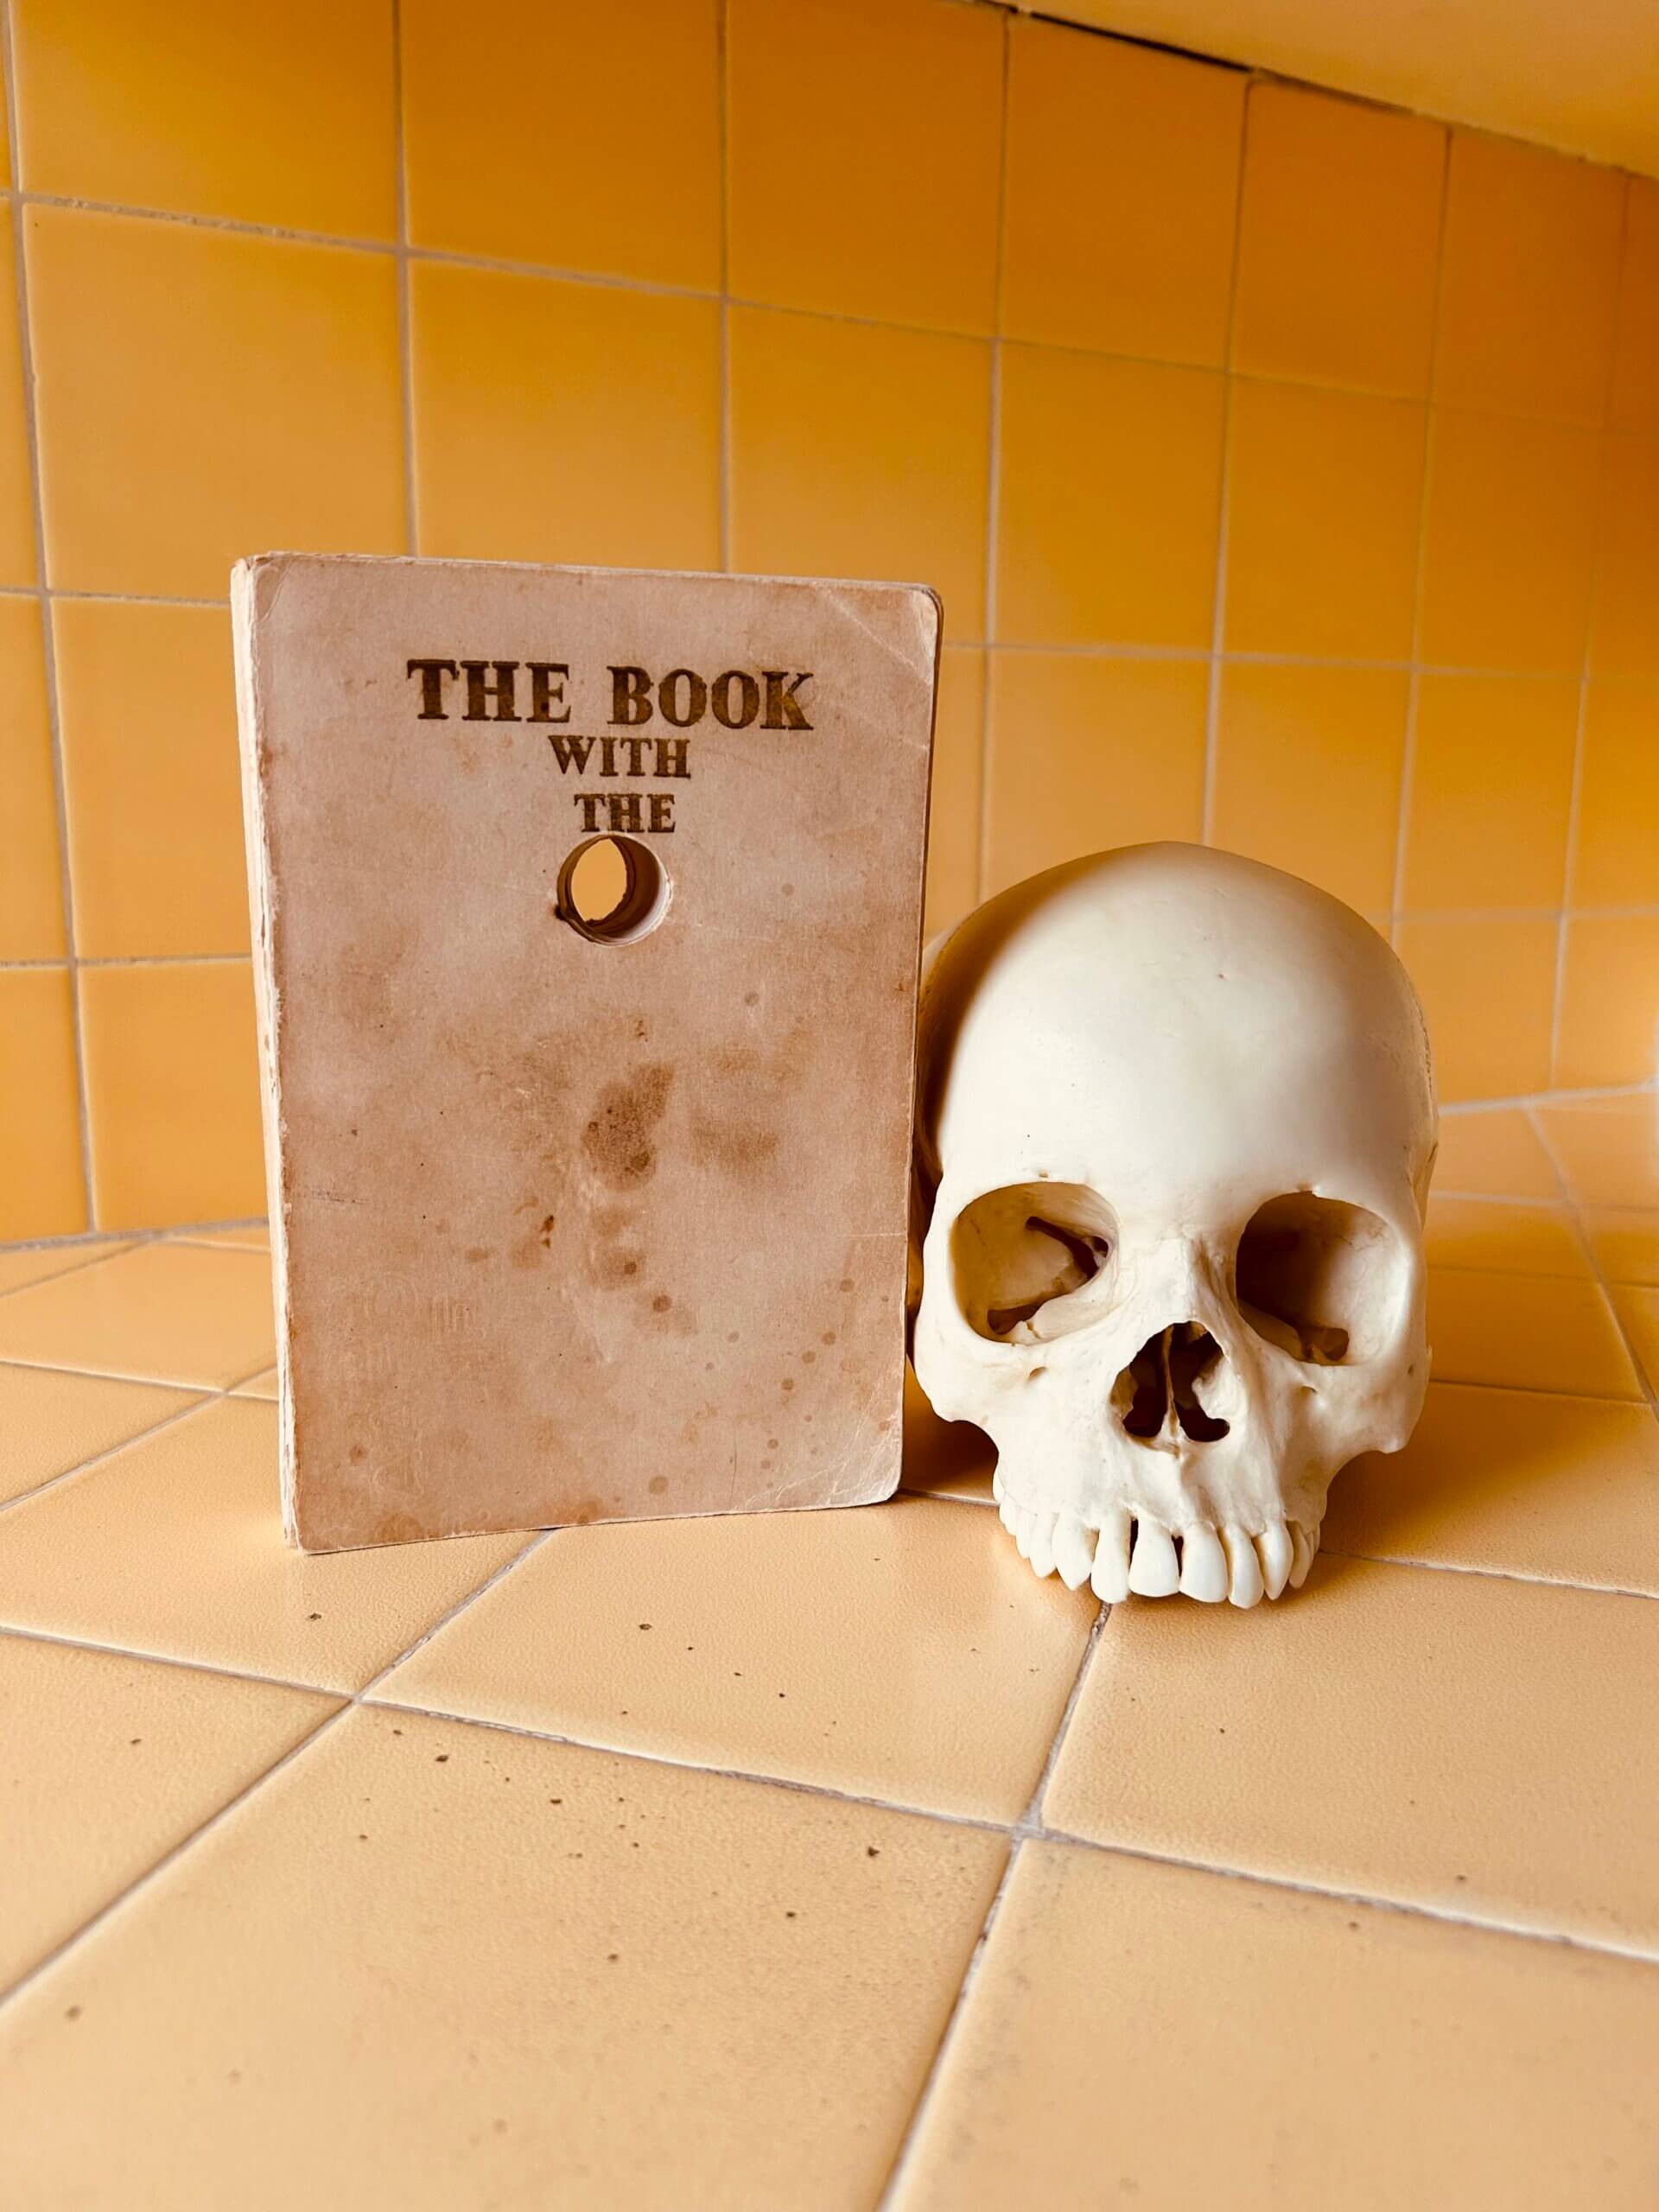 The Book with the Hole<br />
next to a skull